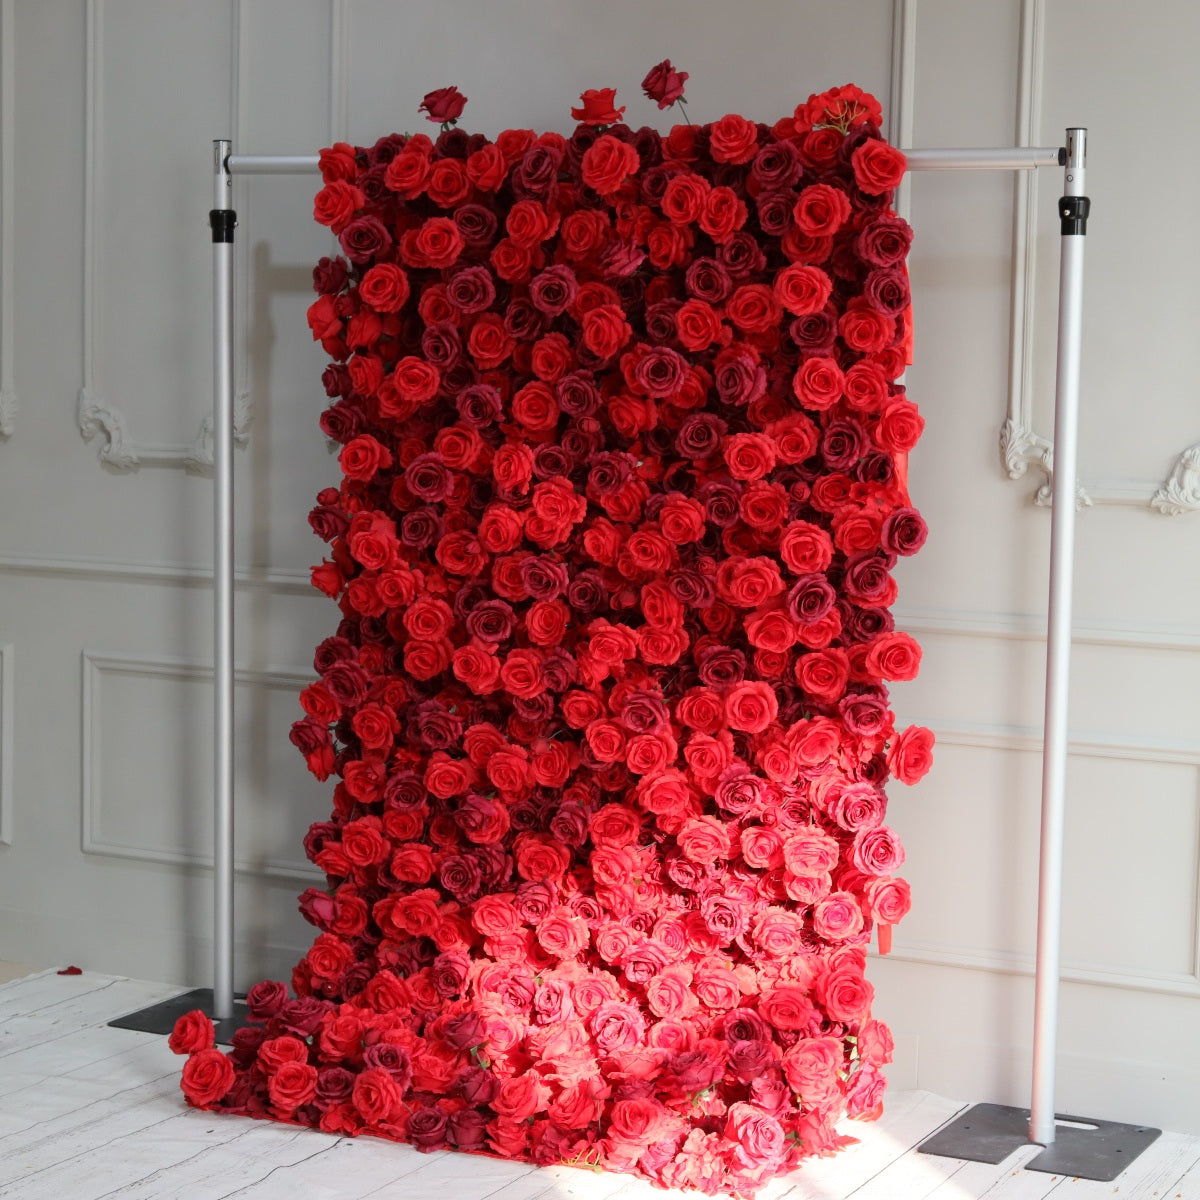 The red and wine red roses flower wall can be hung with shelves